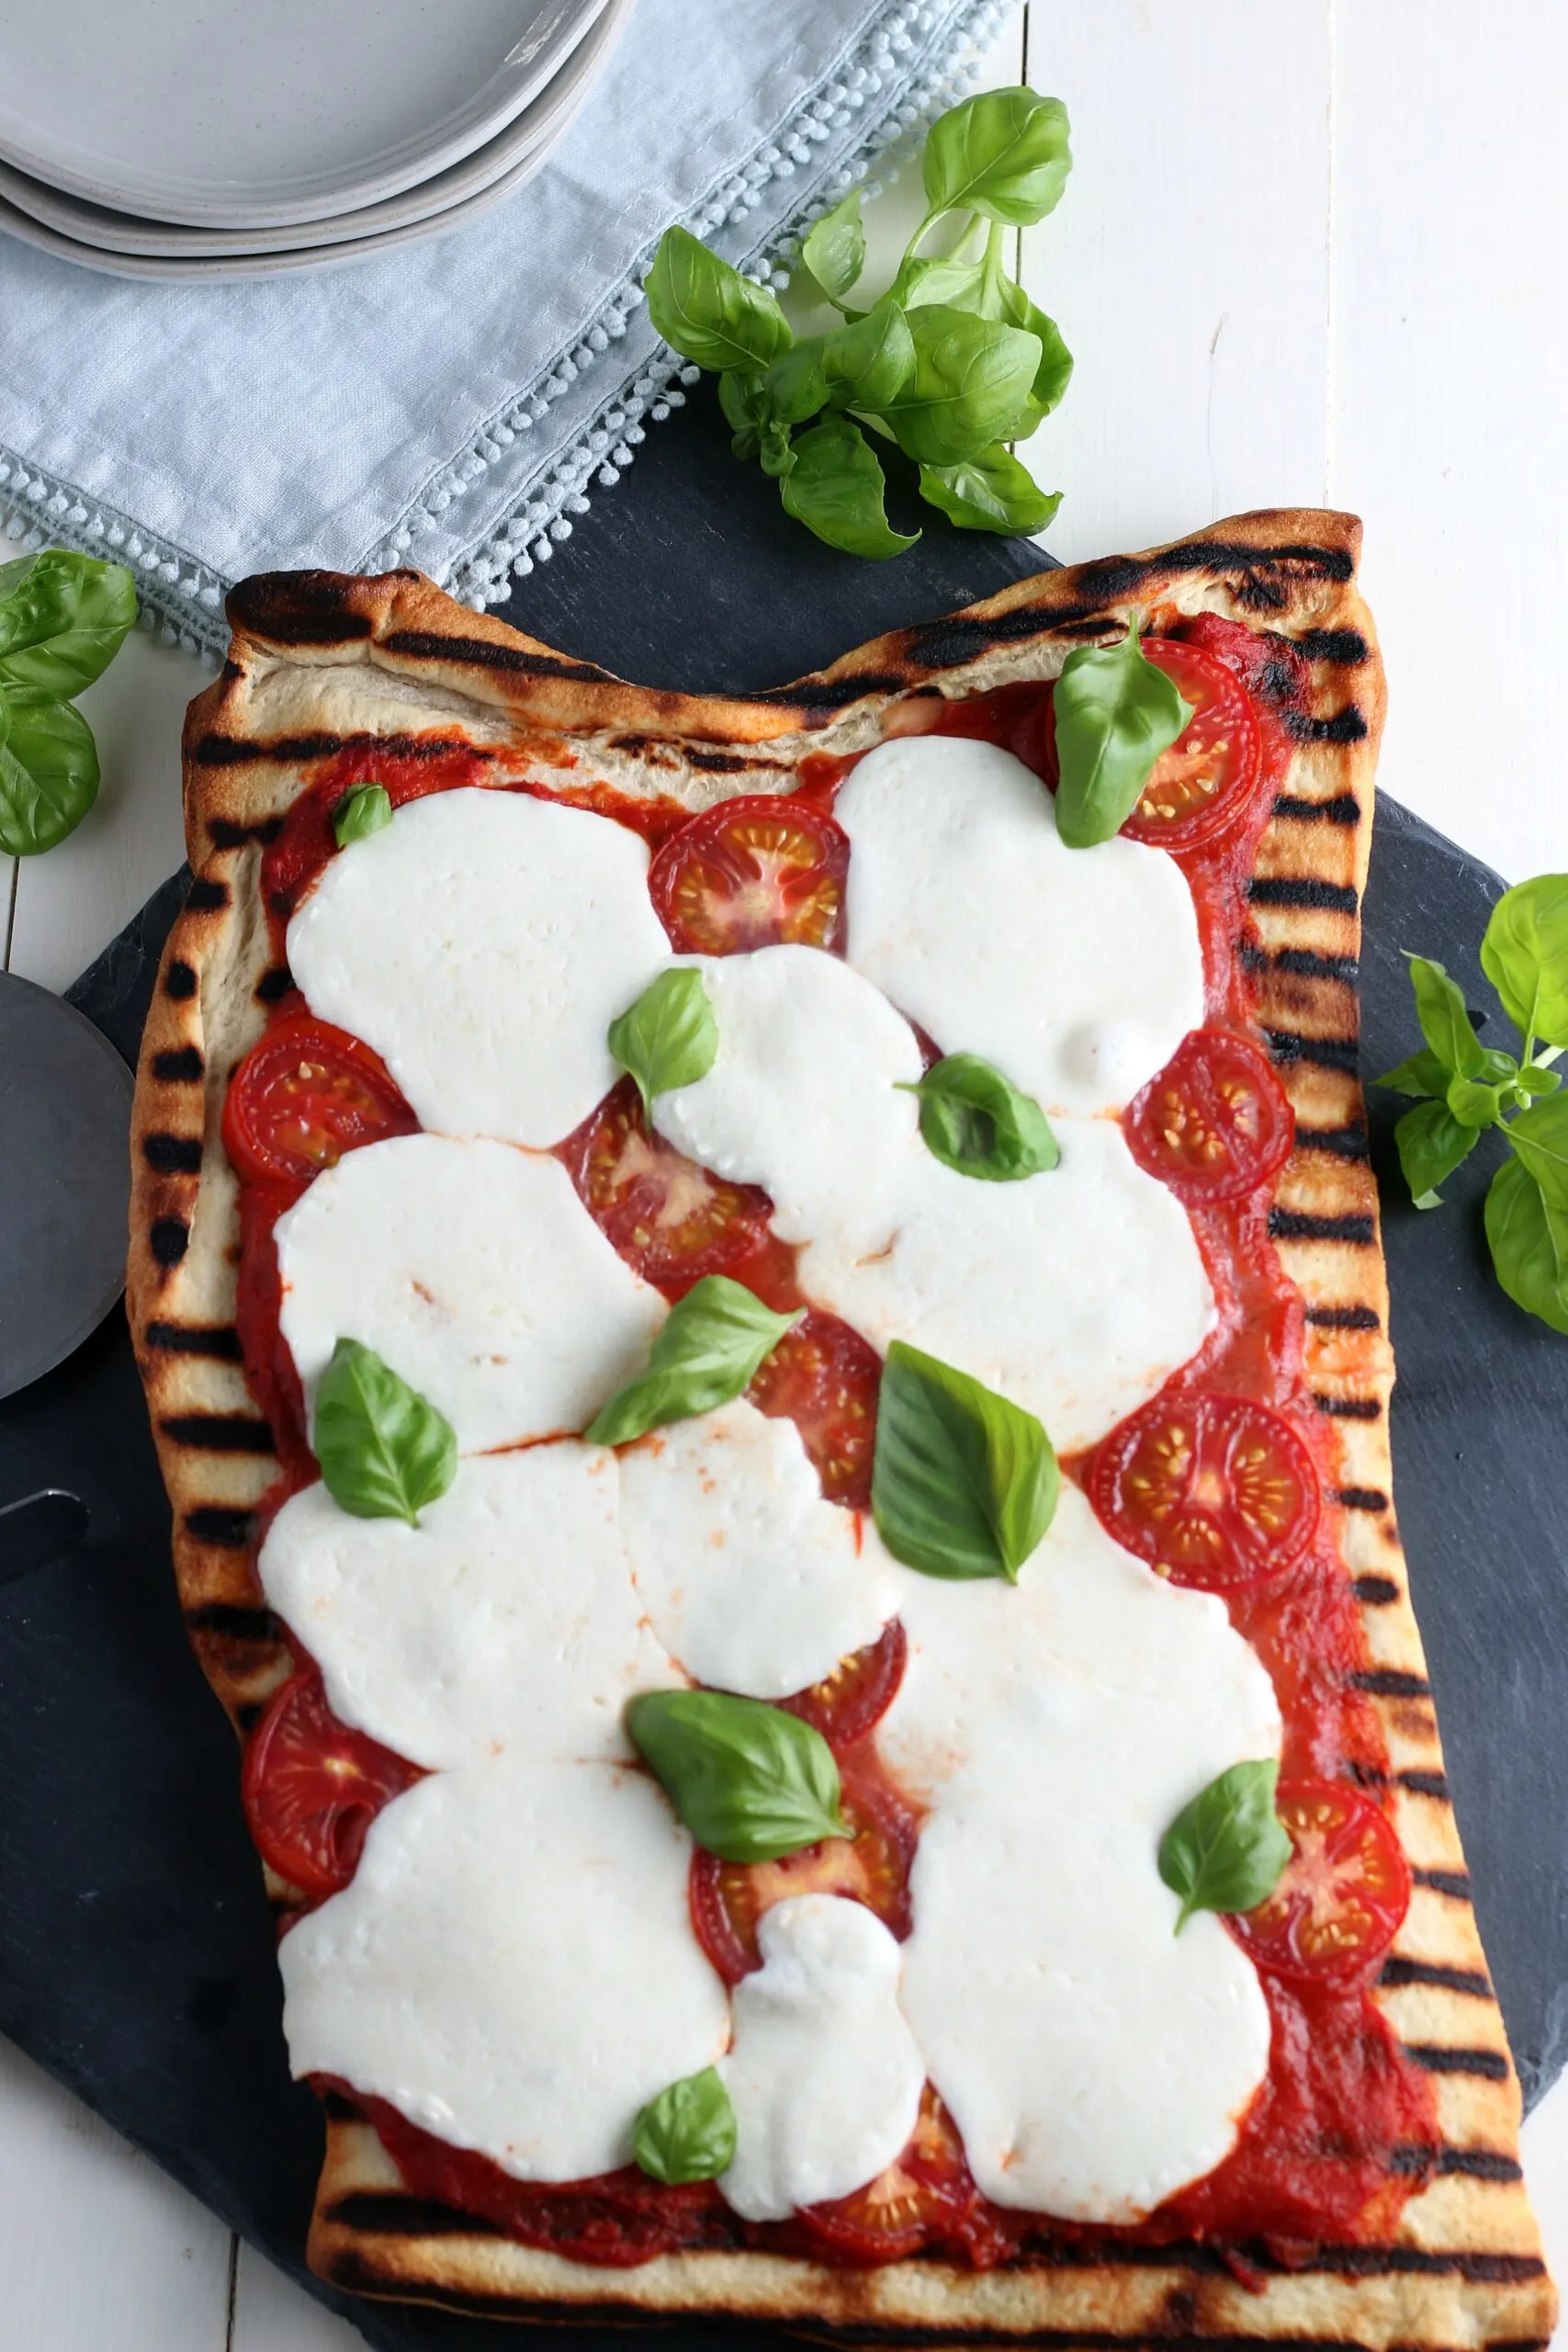 With its classic flavors of tomato sauce, mozzarella cheese, and fresh basil, this easy Margherita pizza takes it to the next level by being cooked to perfection on your grill. via @Mooreorlesscook